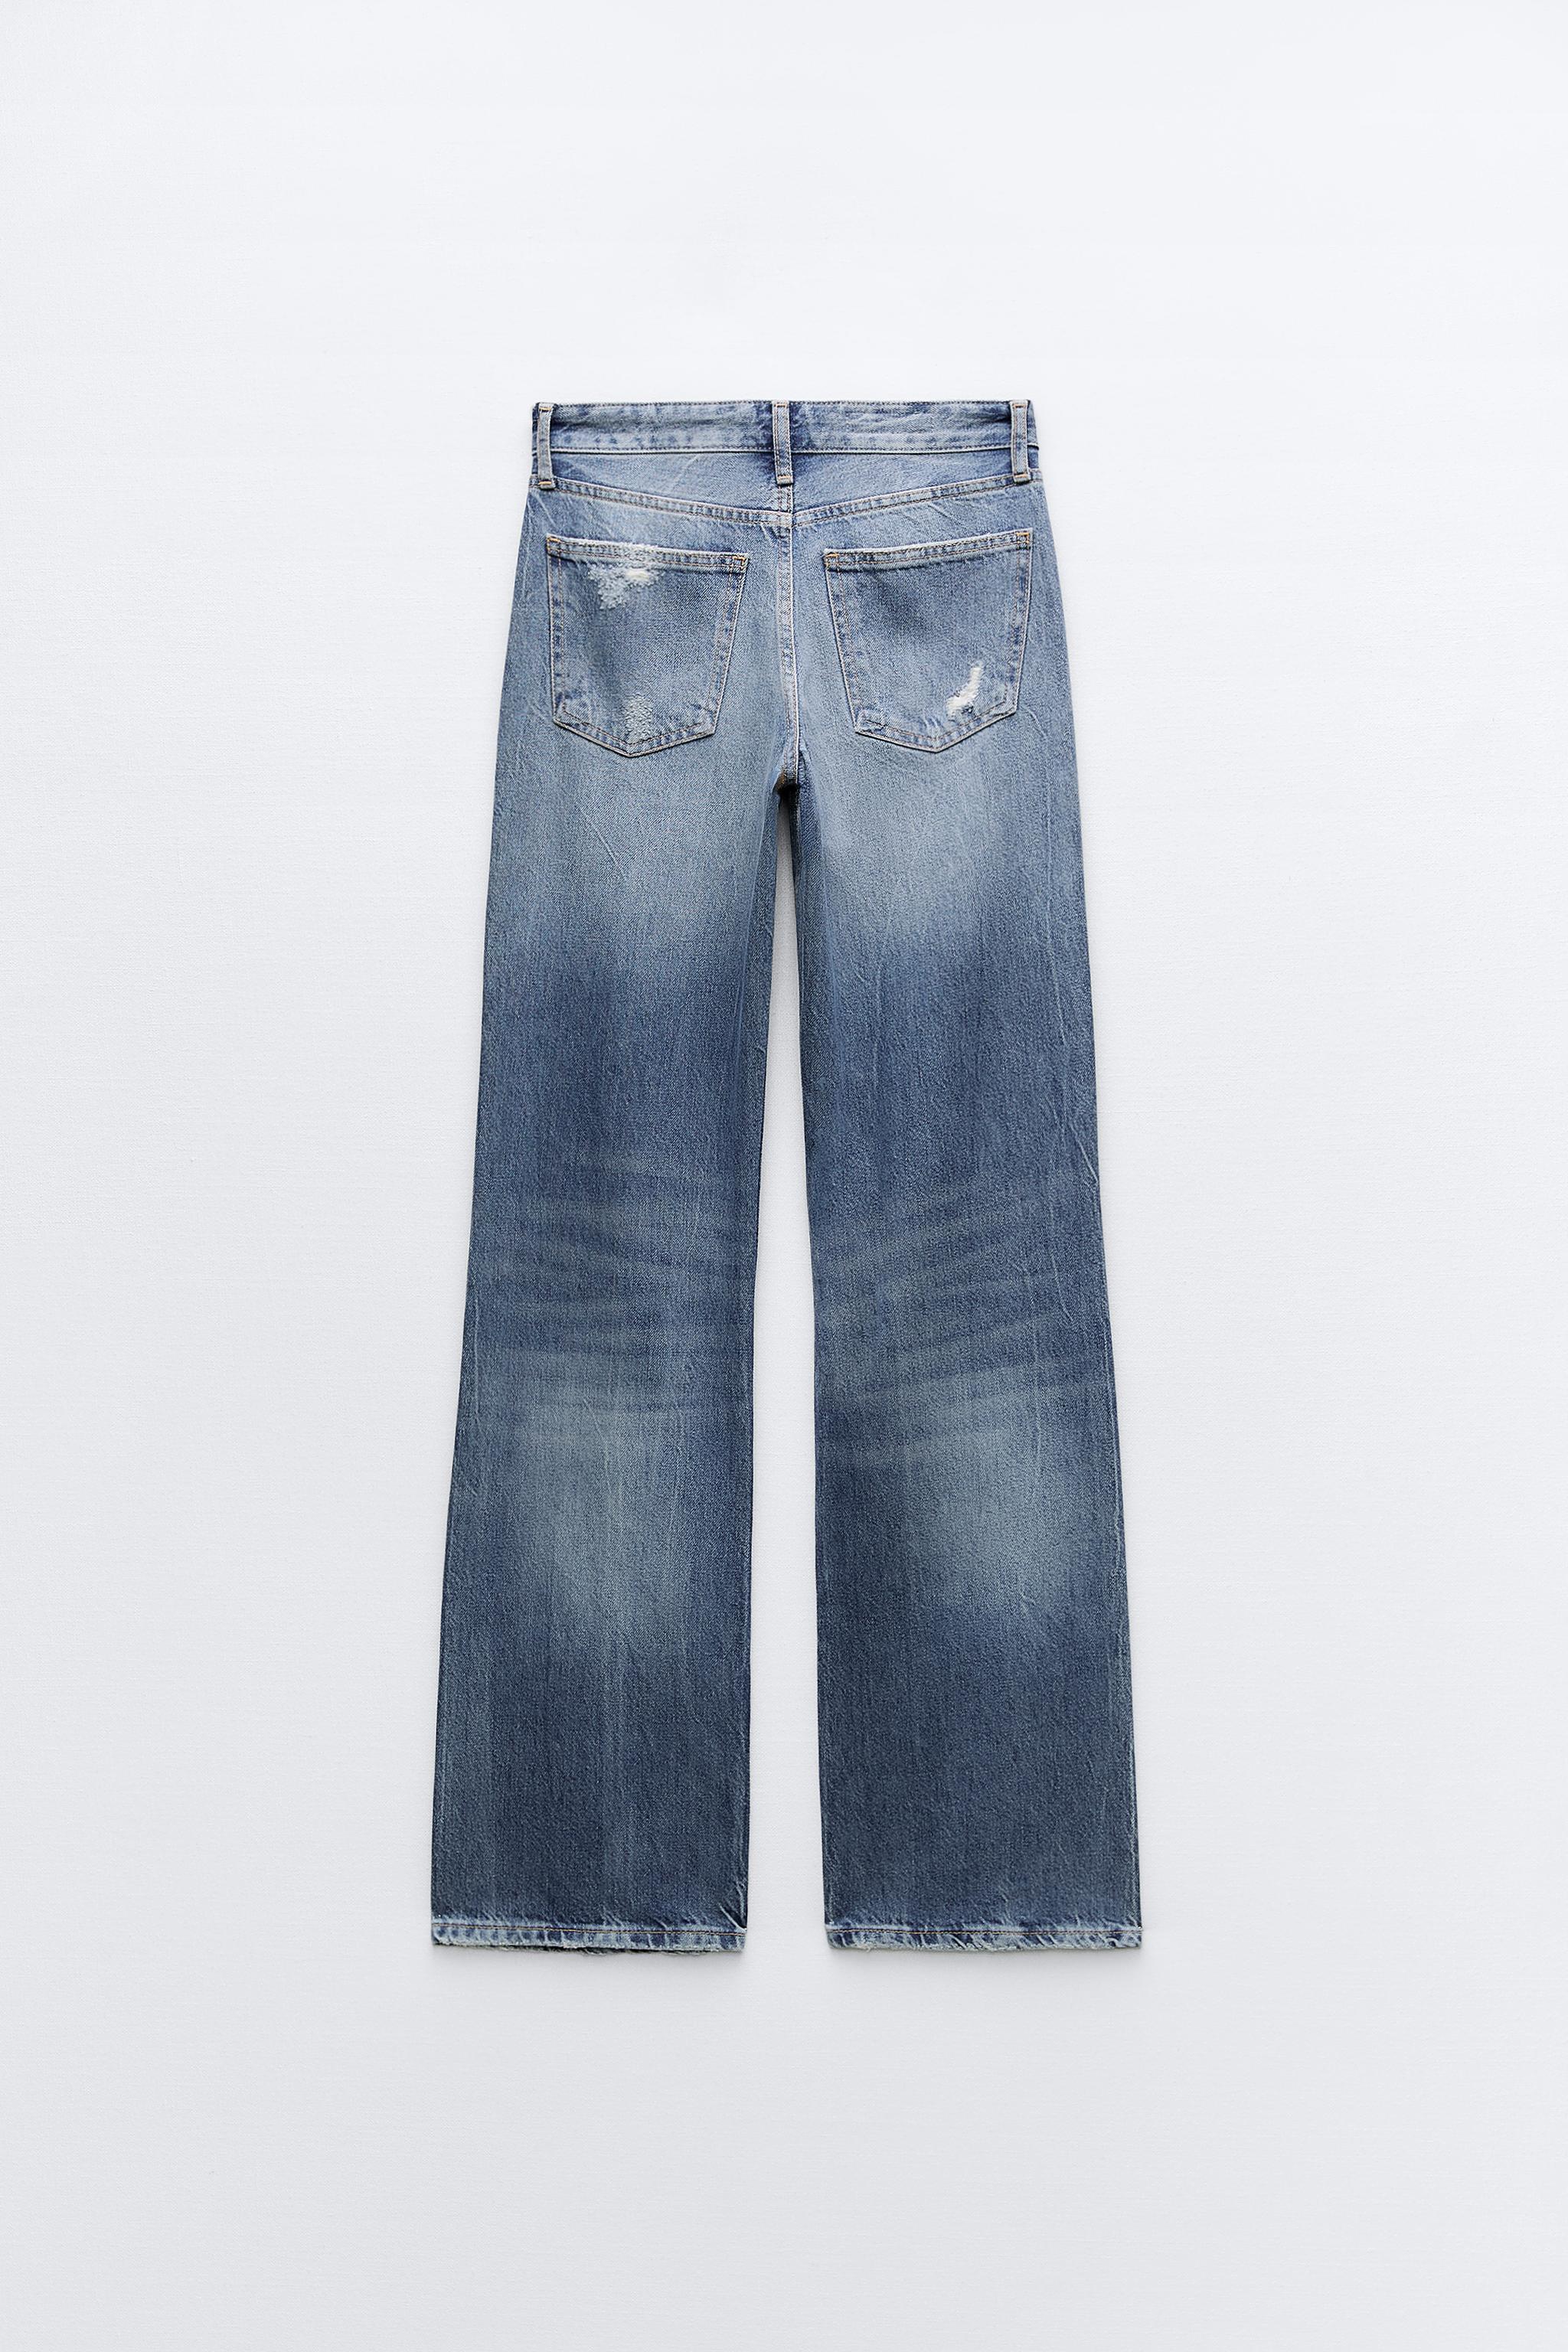 Zara jeans with 'wrinkle effect' shock with high price tag